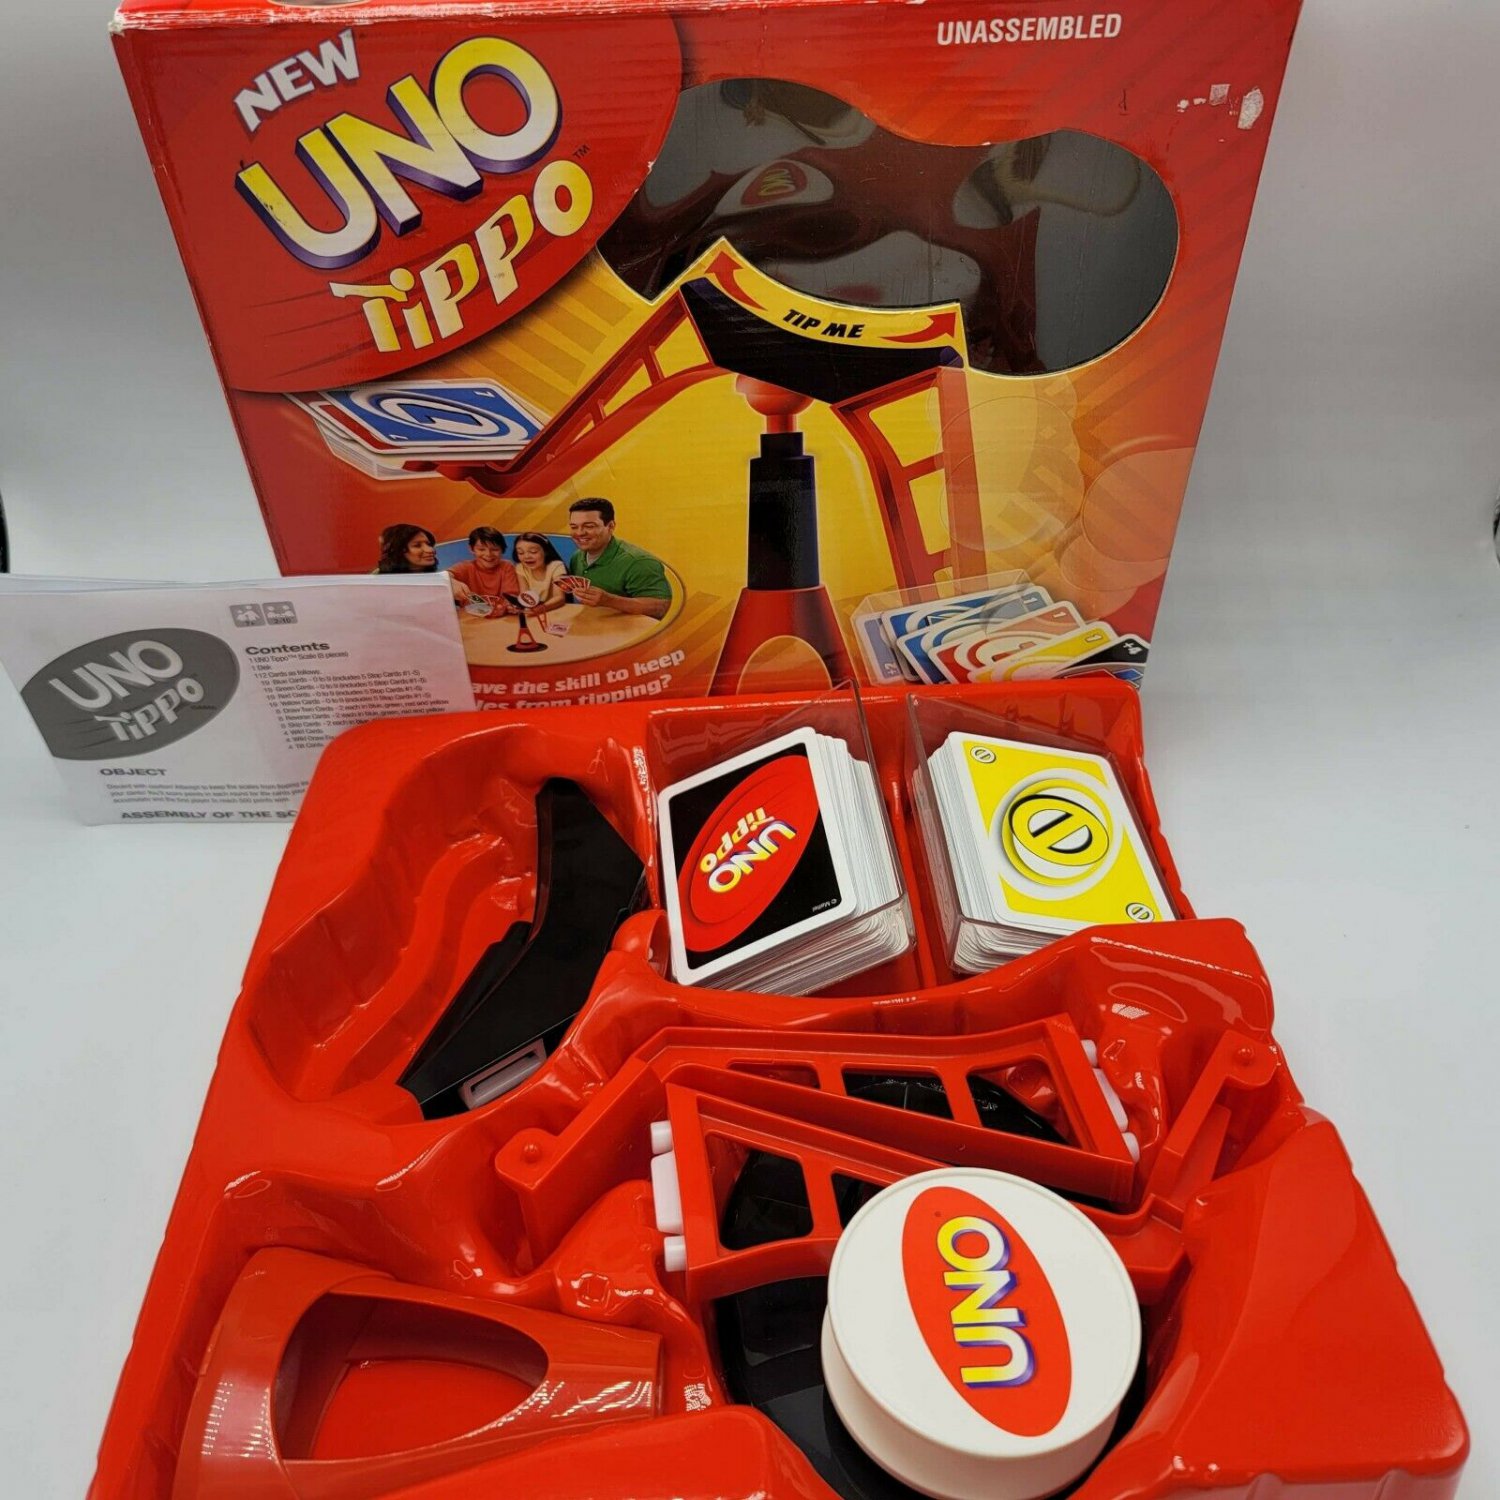 Mattel UNO Tippo Game Complete 2009 Family R2827 for sale online 